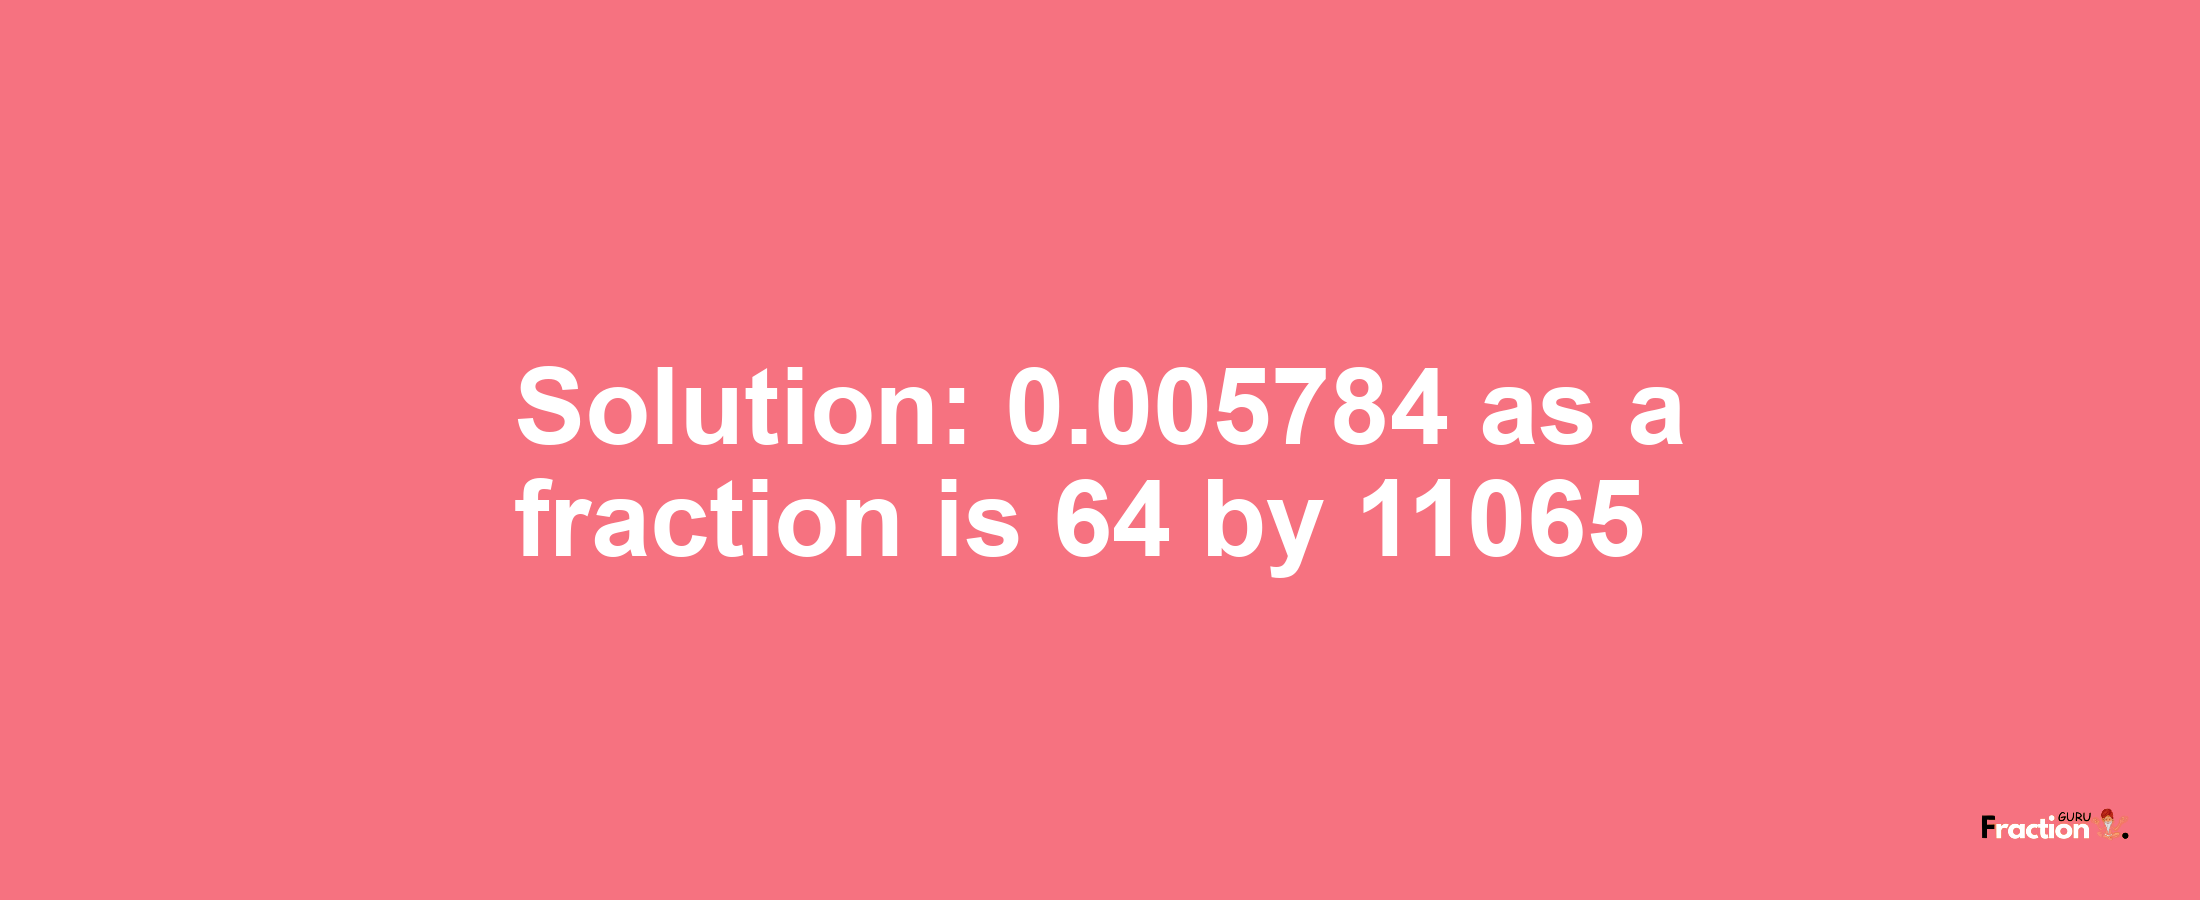 Solution:0.005784 as a fraction is 64/11065